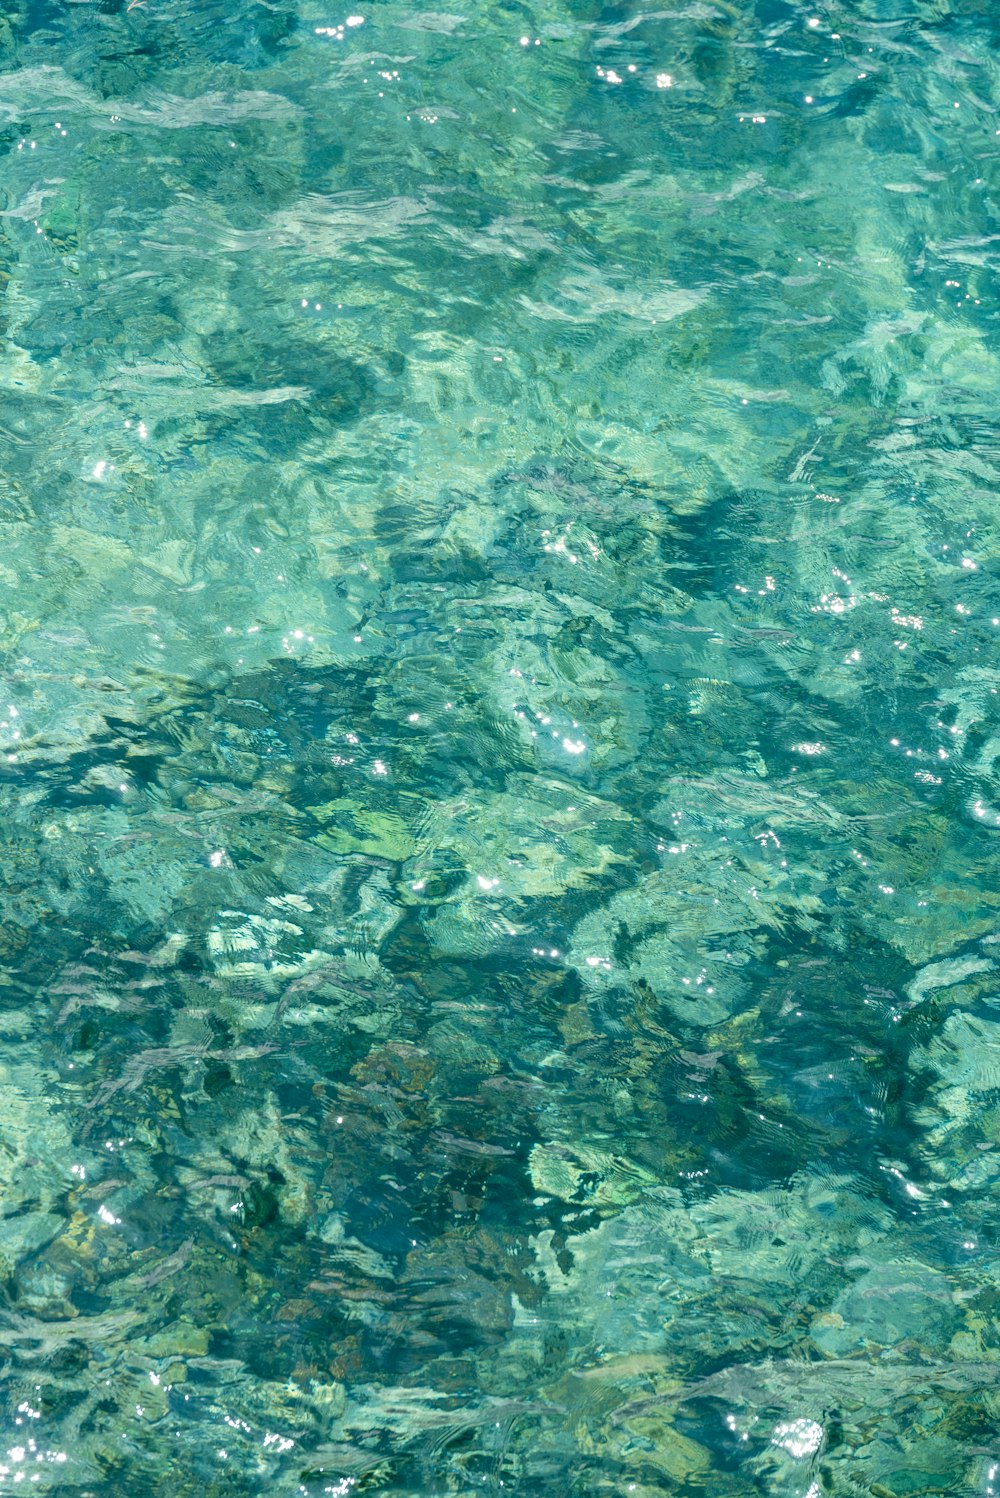 clear water with small rocks